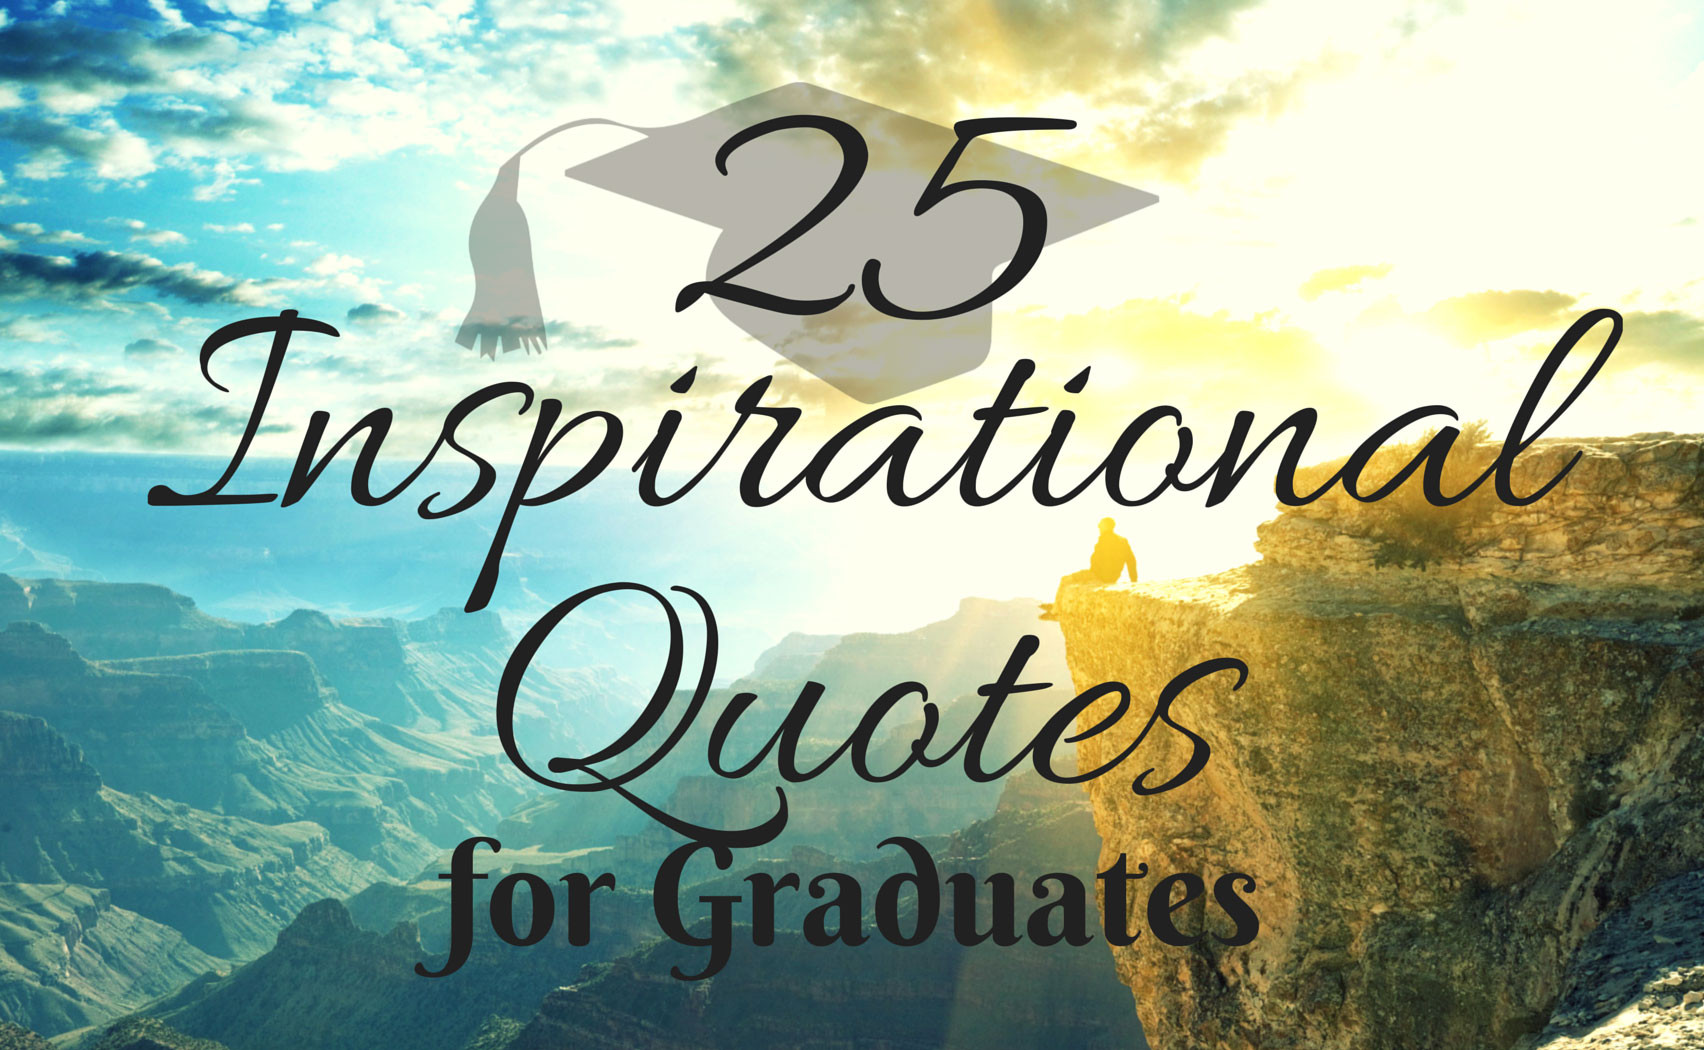 College Graduation Inspirational Quotes
 Graduation Quotes For Elementary Students QuotesGram